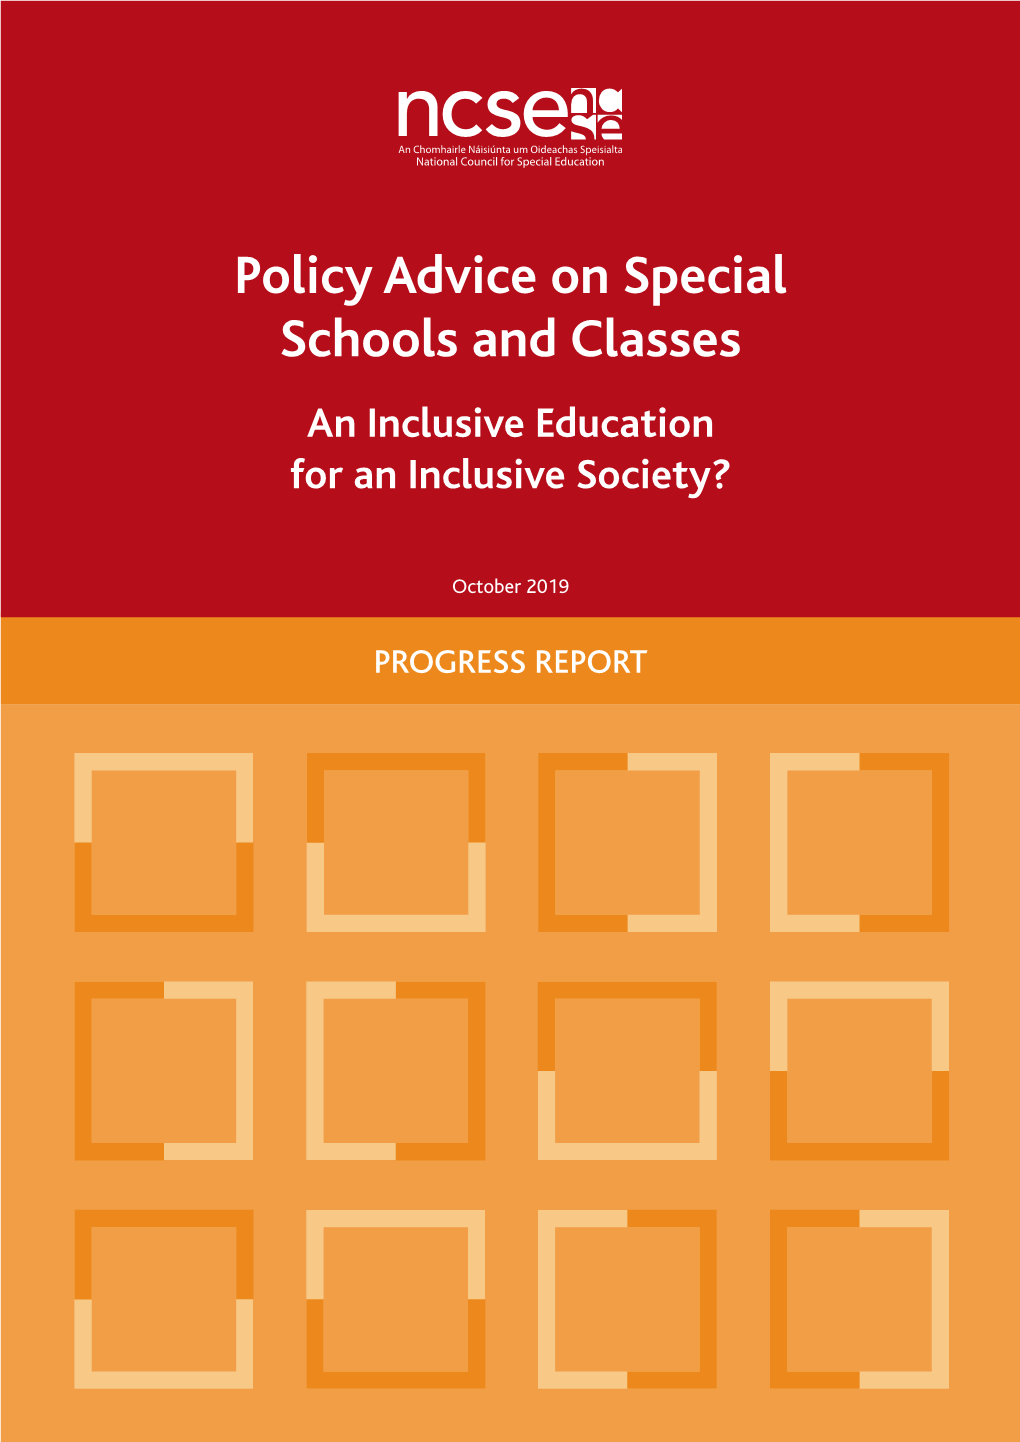 Policy Advice on Special Schools and Classes Policy Advice on Special Schools and Classes an Inclusive Education for an Inclusive Society?